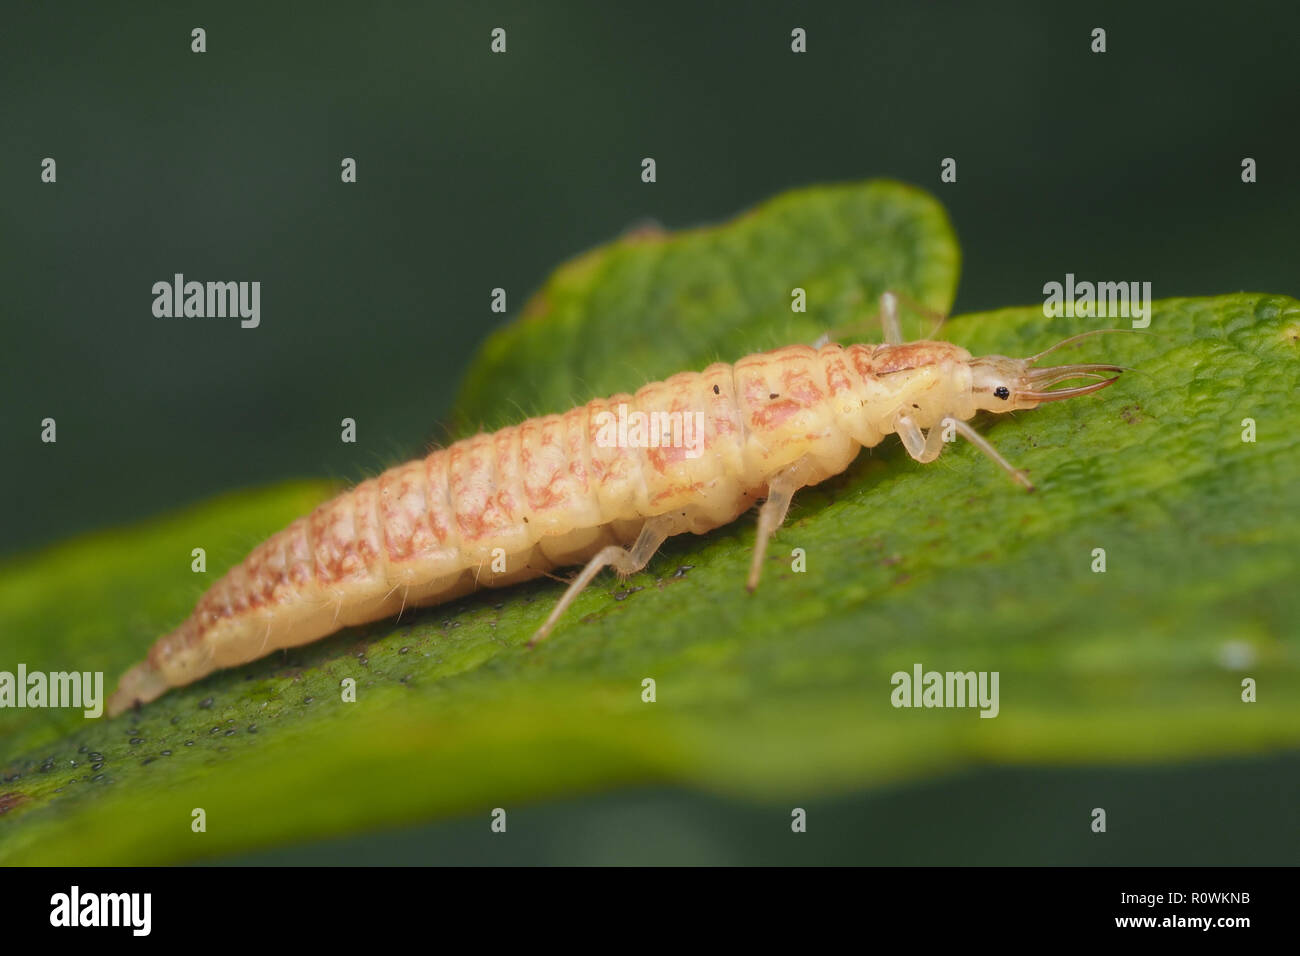 Lacewing larva resting on leaf. Tipperary, Ireland Stock Photo